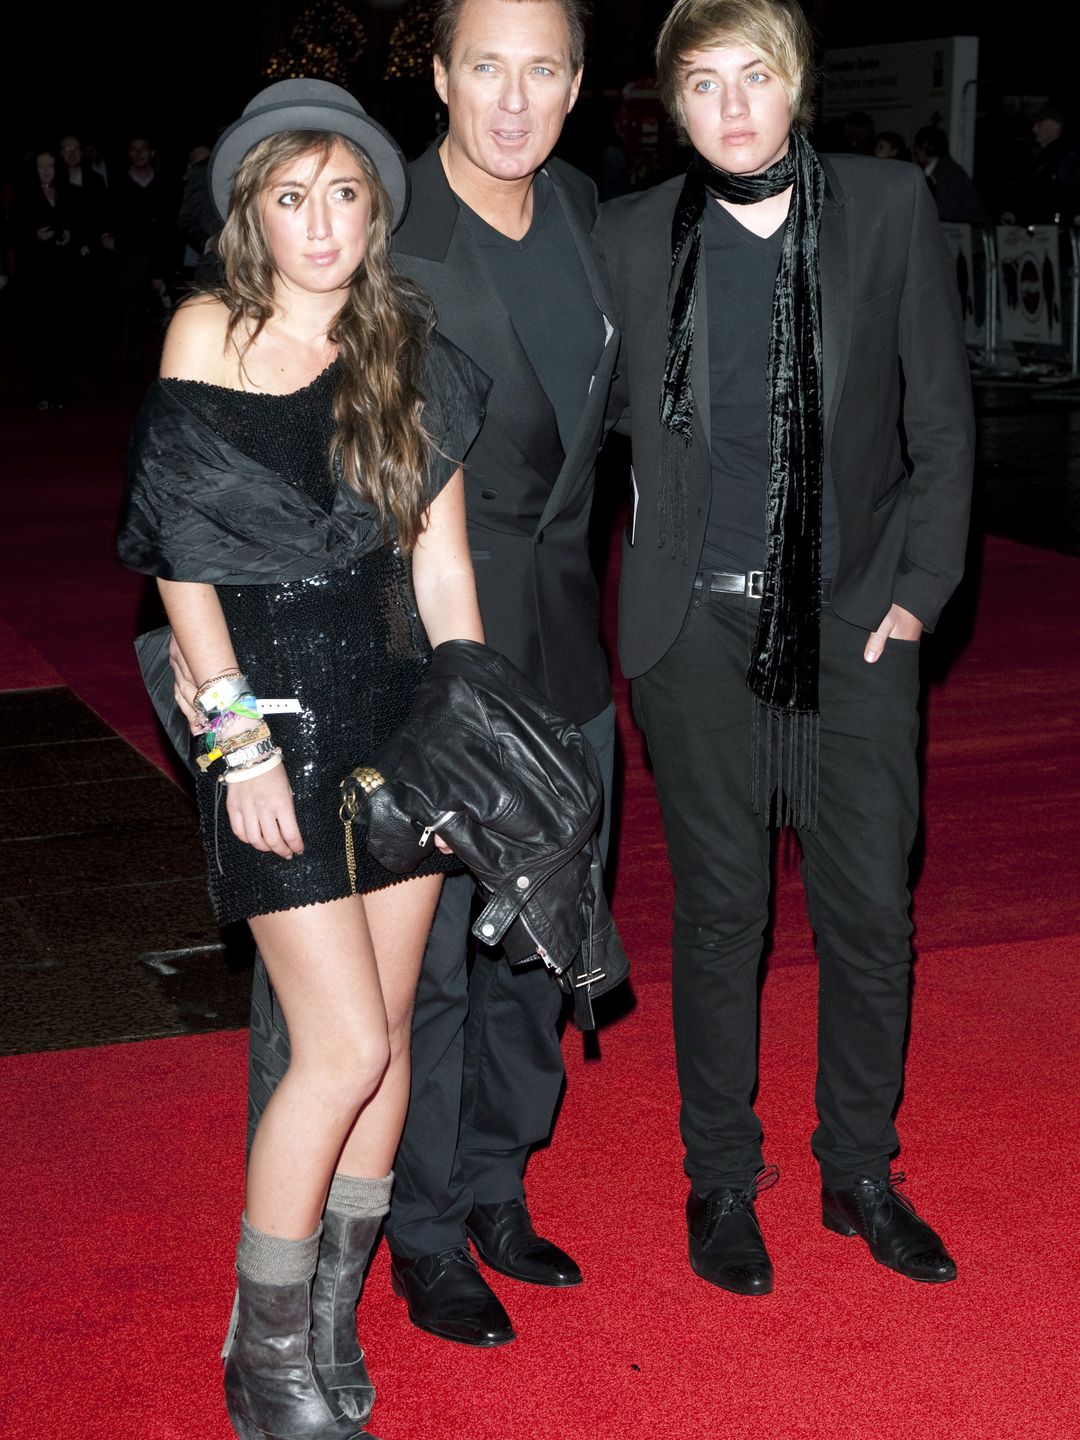 Roman and Harleymoon Kemp with their dad, Martin, at the premiere of Harry Brown